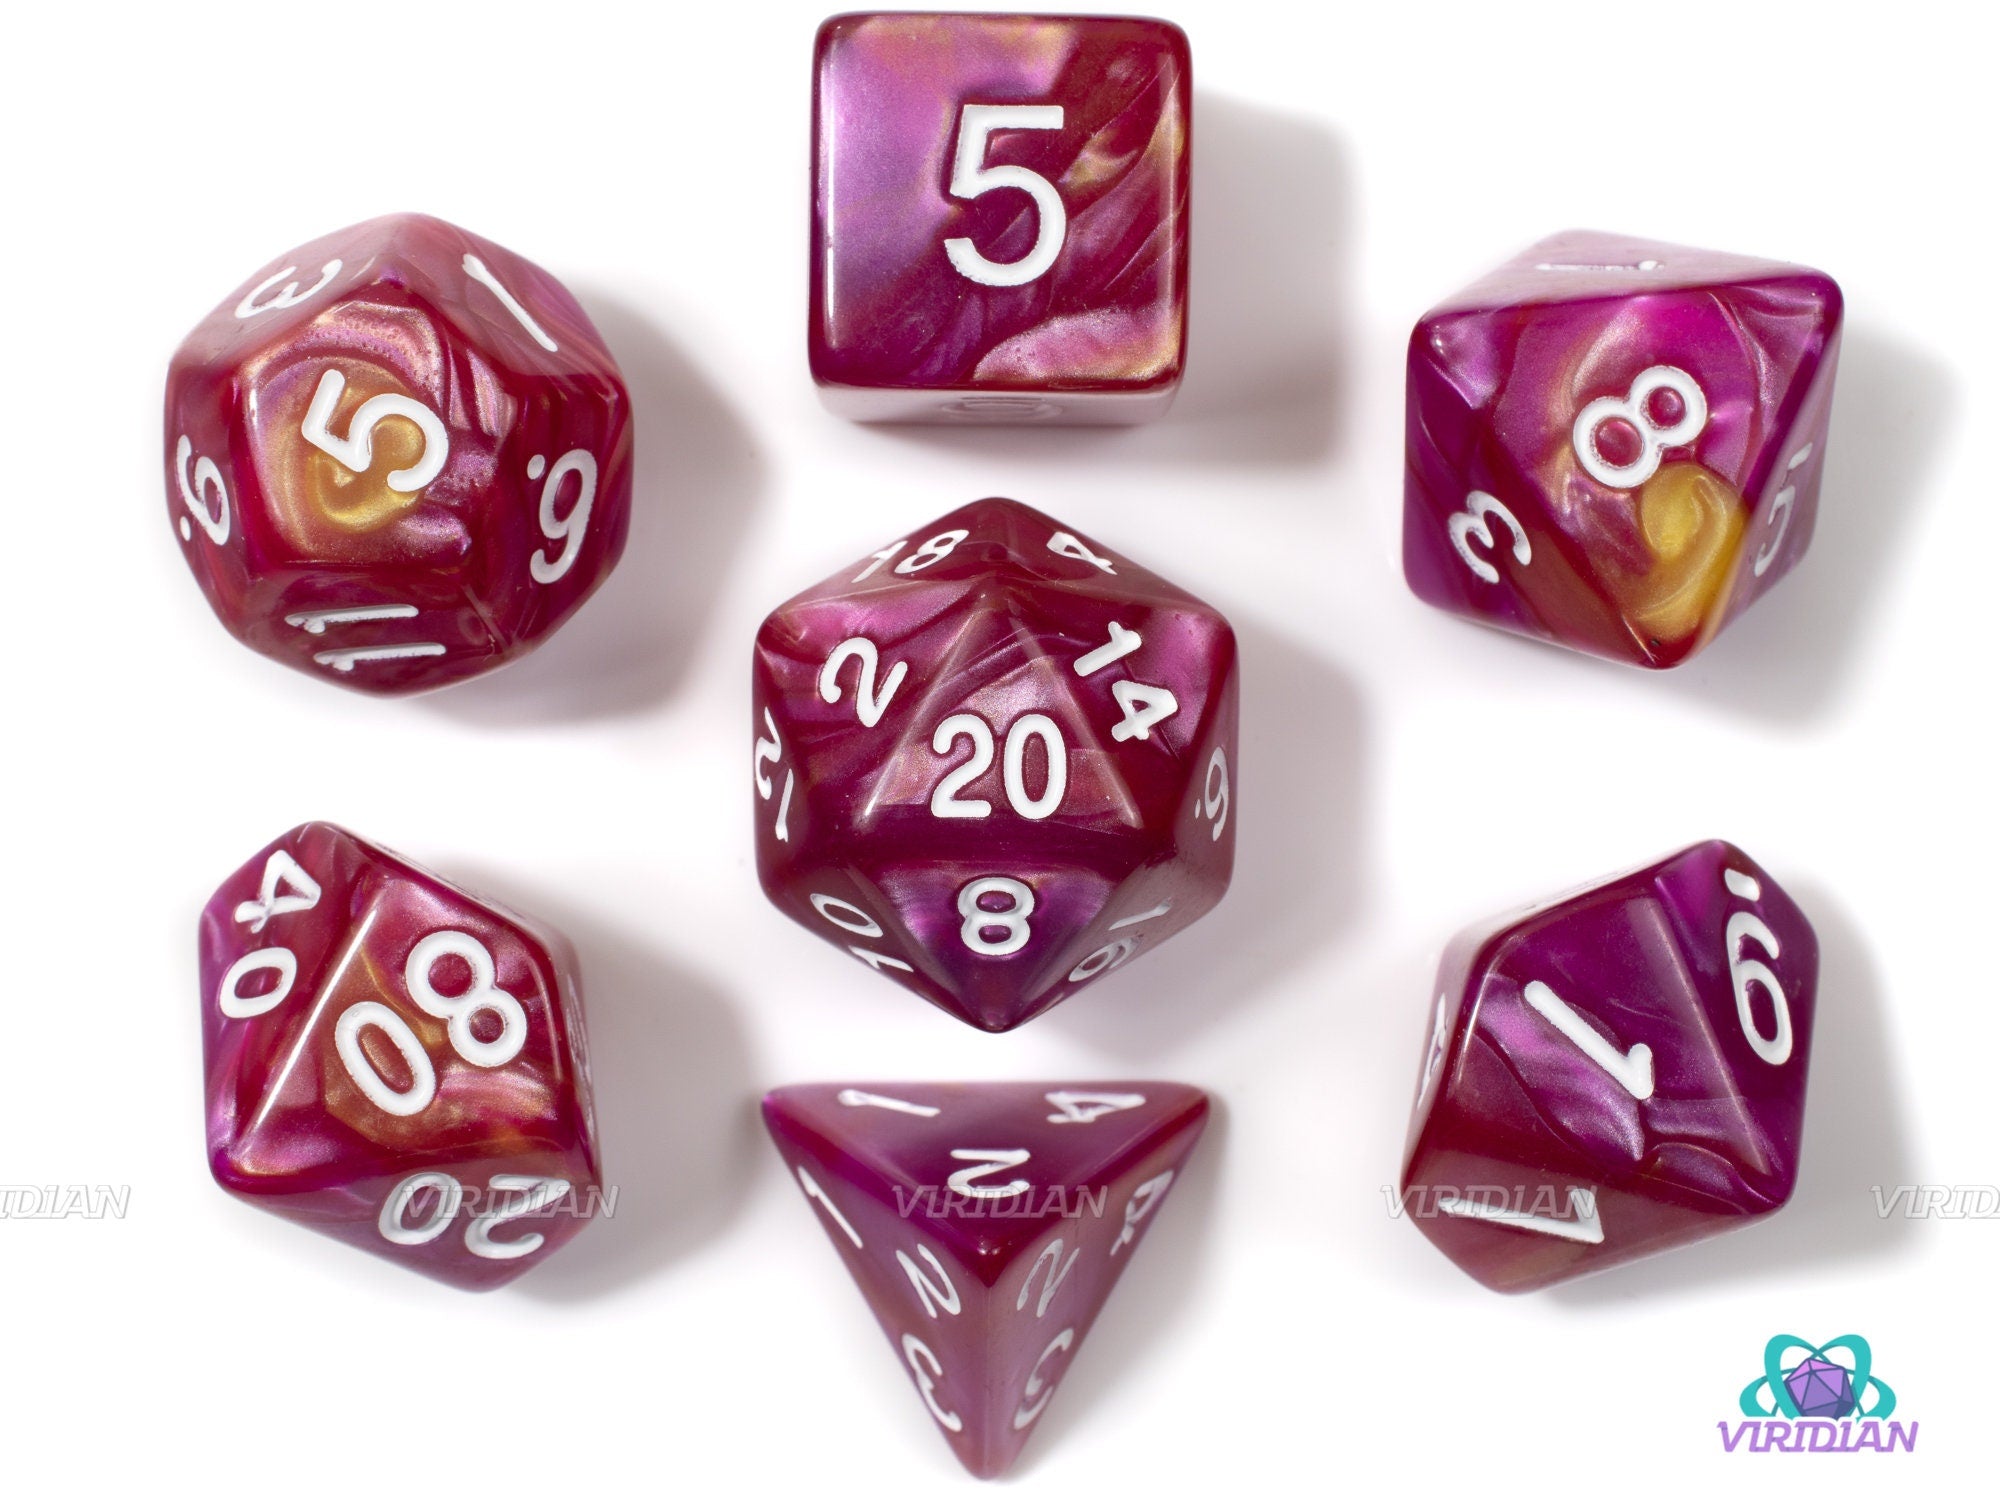 Beholder Hide | Red, Pink and Orange Swirled Acrylic Dice Set (7) | Dungeons and Dragons (DnD)